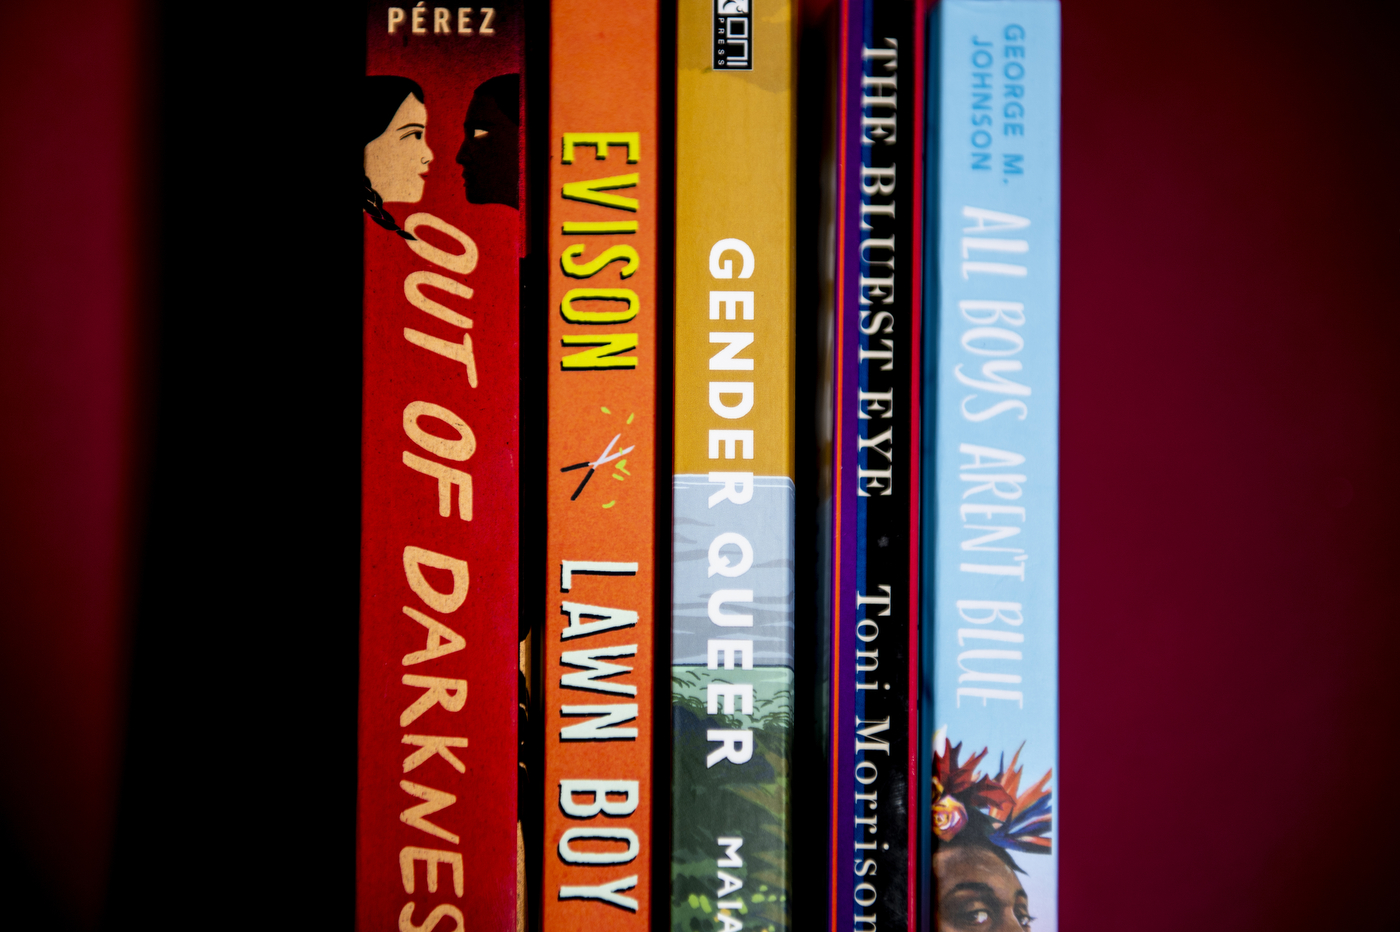 A row of five books, all with multi-colored spins, are placed in front of a red-colored wall.